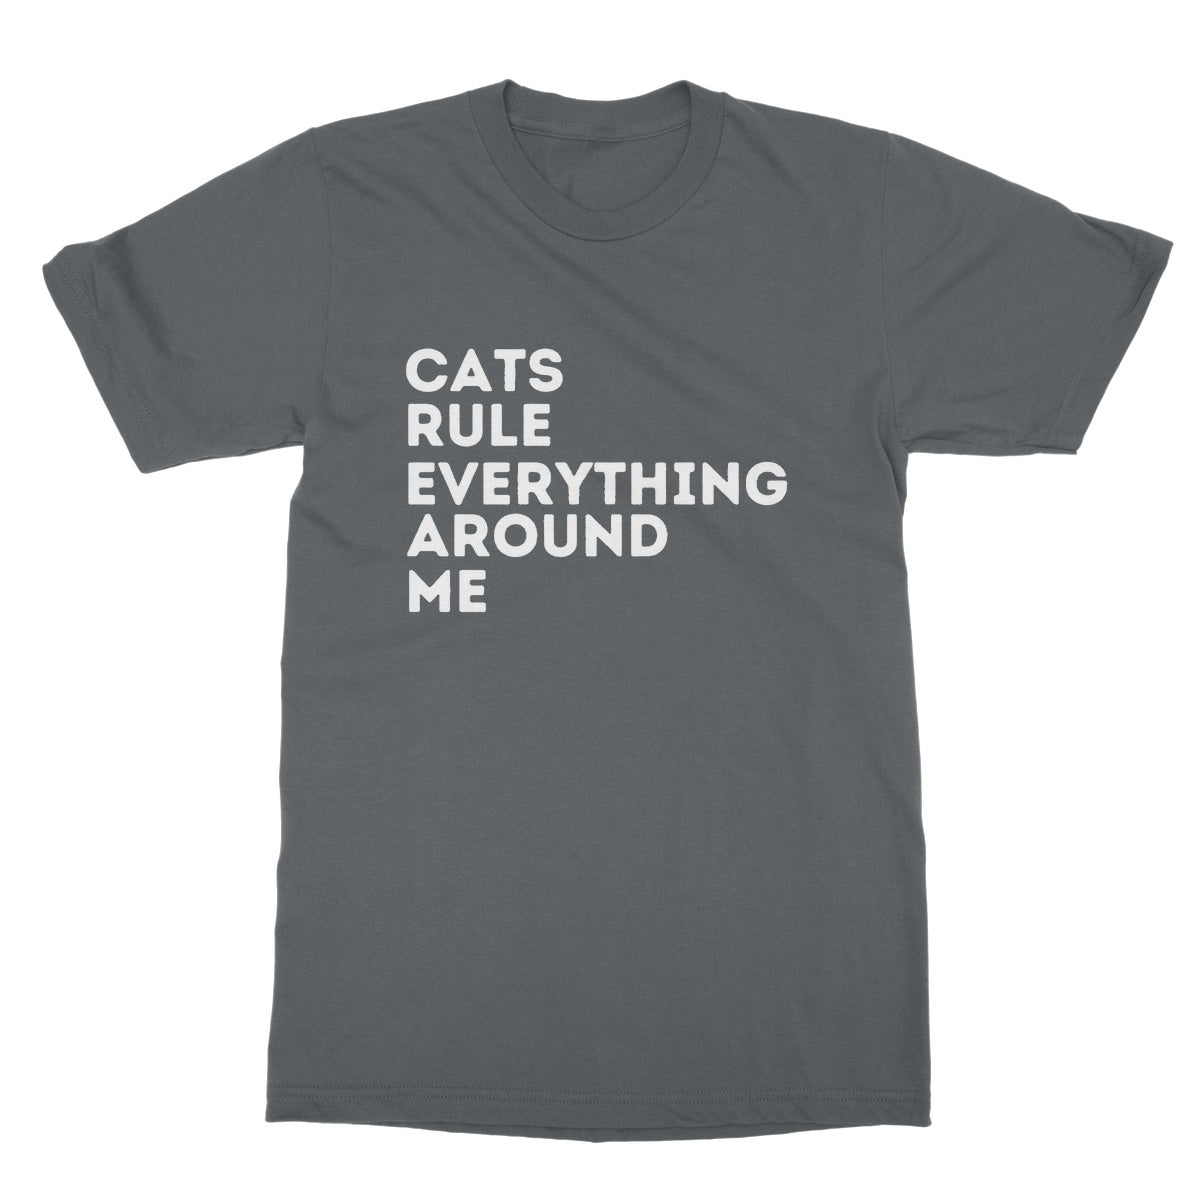 cats rule everything around me t shirt grey